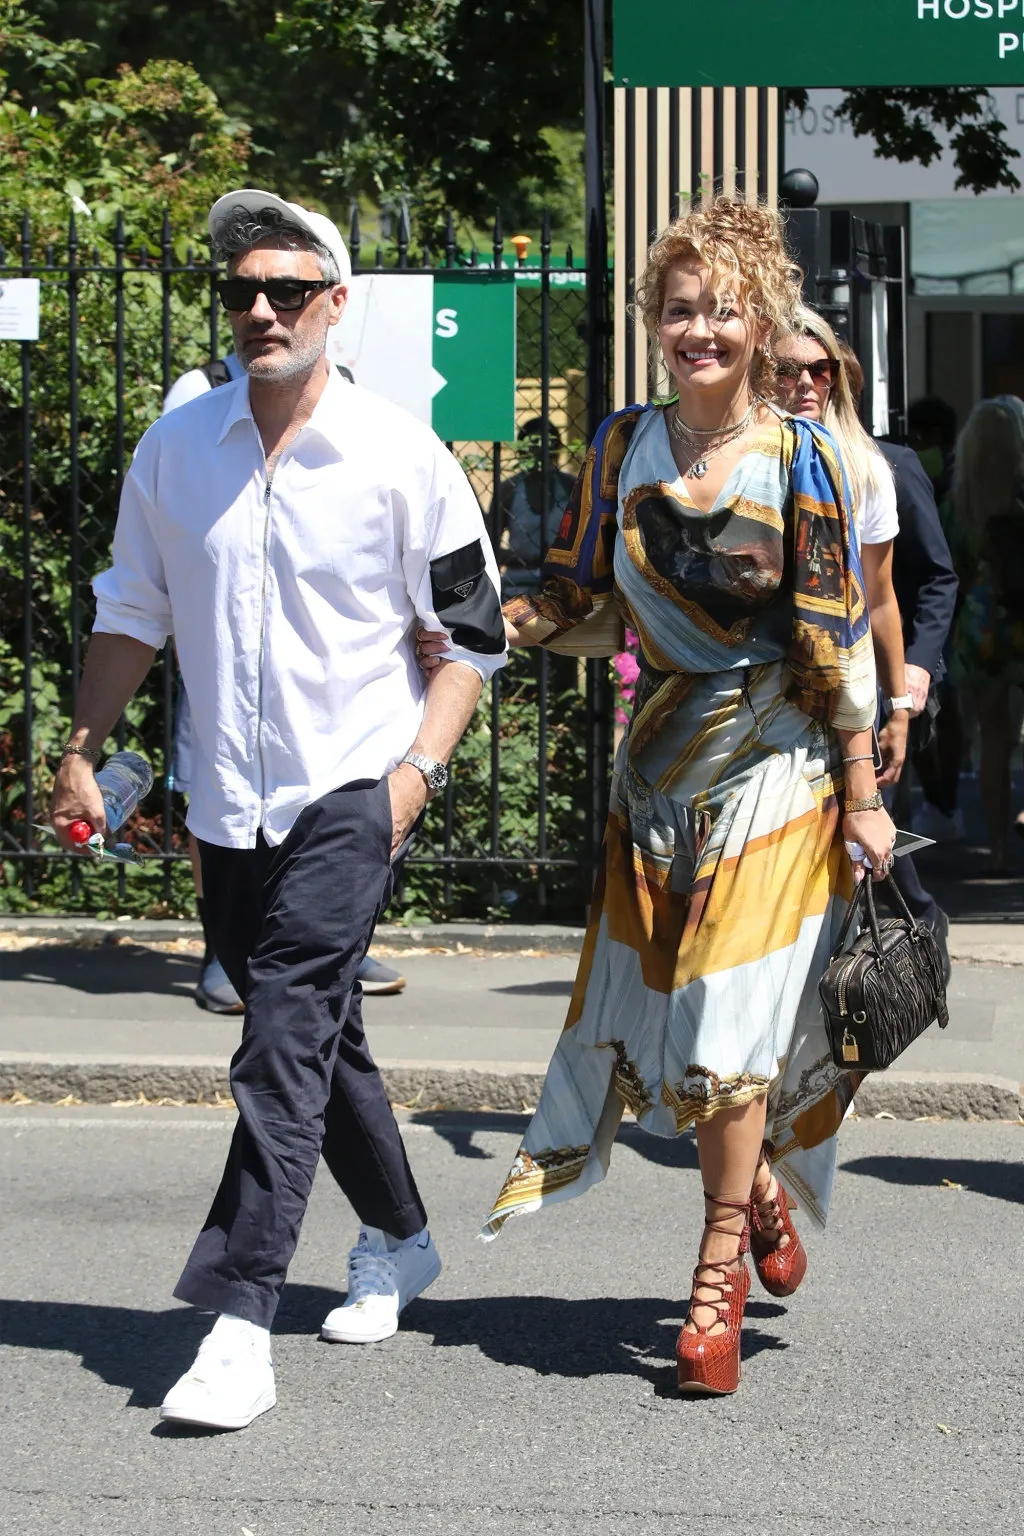 There are media reports that singer Rita Ora and director Taika Waititi are married in London | FMV6